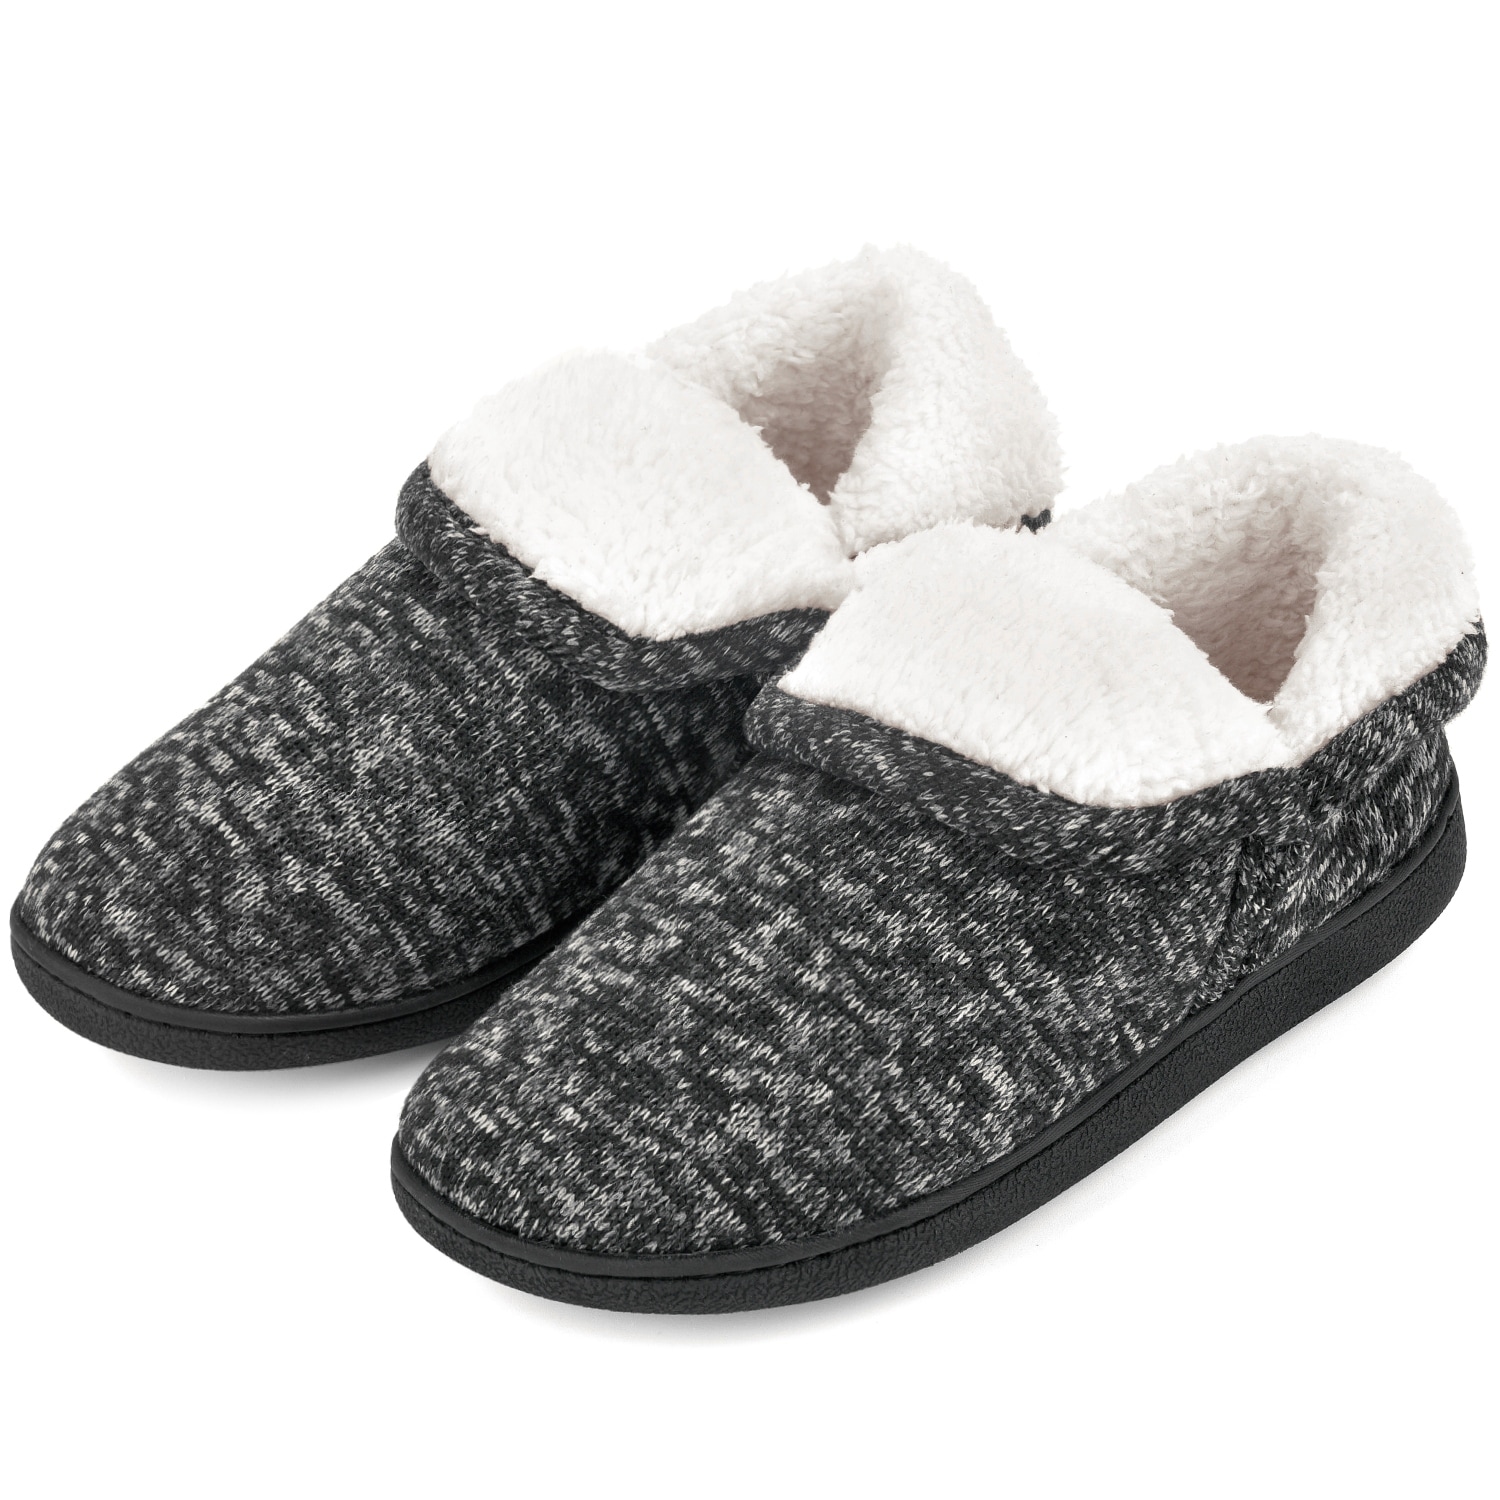 VONMAY Women's Fuzzy Slippers Boots 